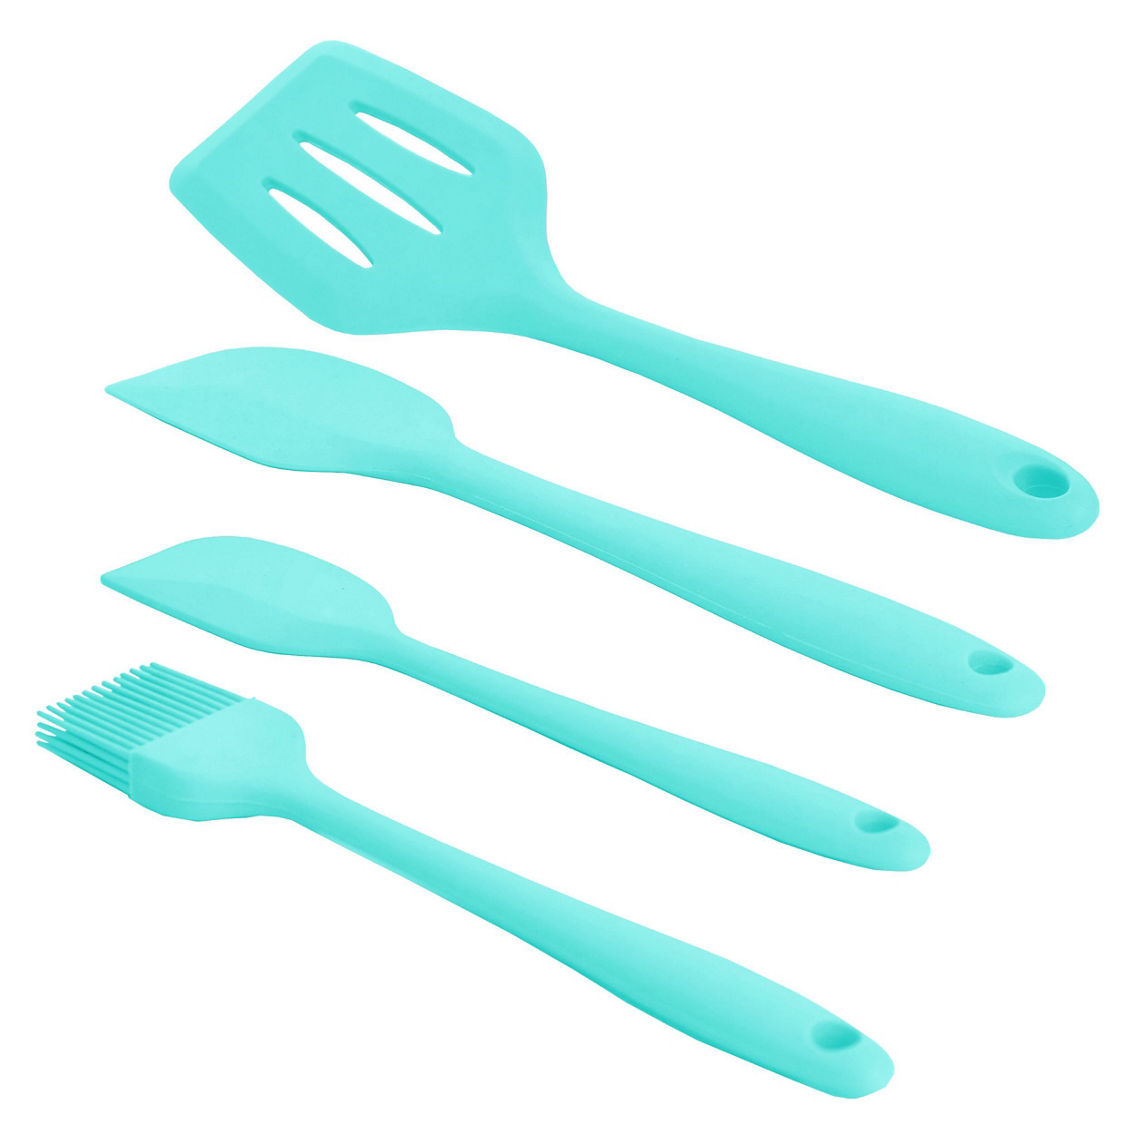 MegaChef Light Teal Silicone Cooking Utensils, Set of 12 - Image 3 of 5